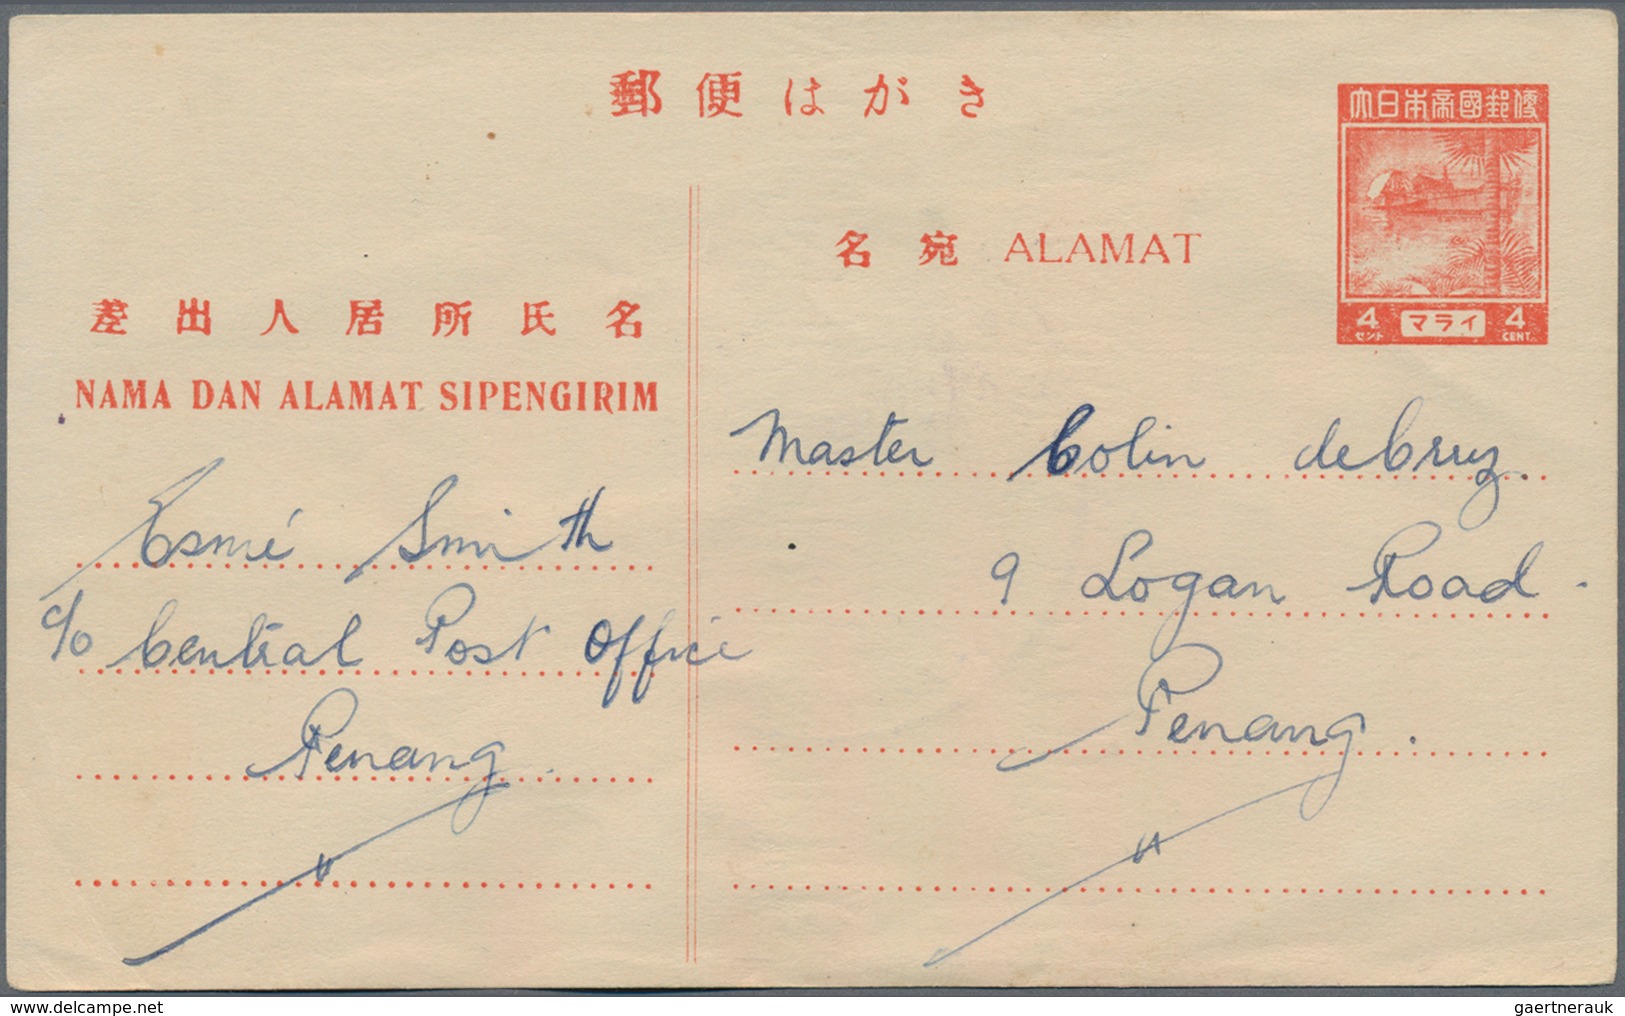 Japanische Besetzung  WK II - Malaya: Penang, 1943/44, covers and blanc envelopes/cards (8) with var